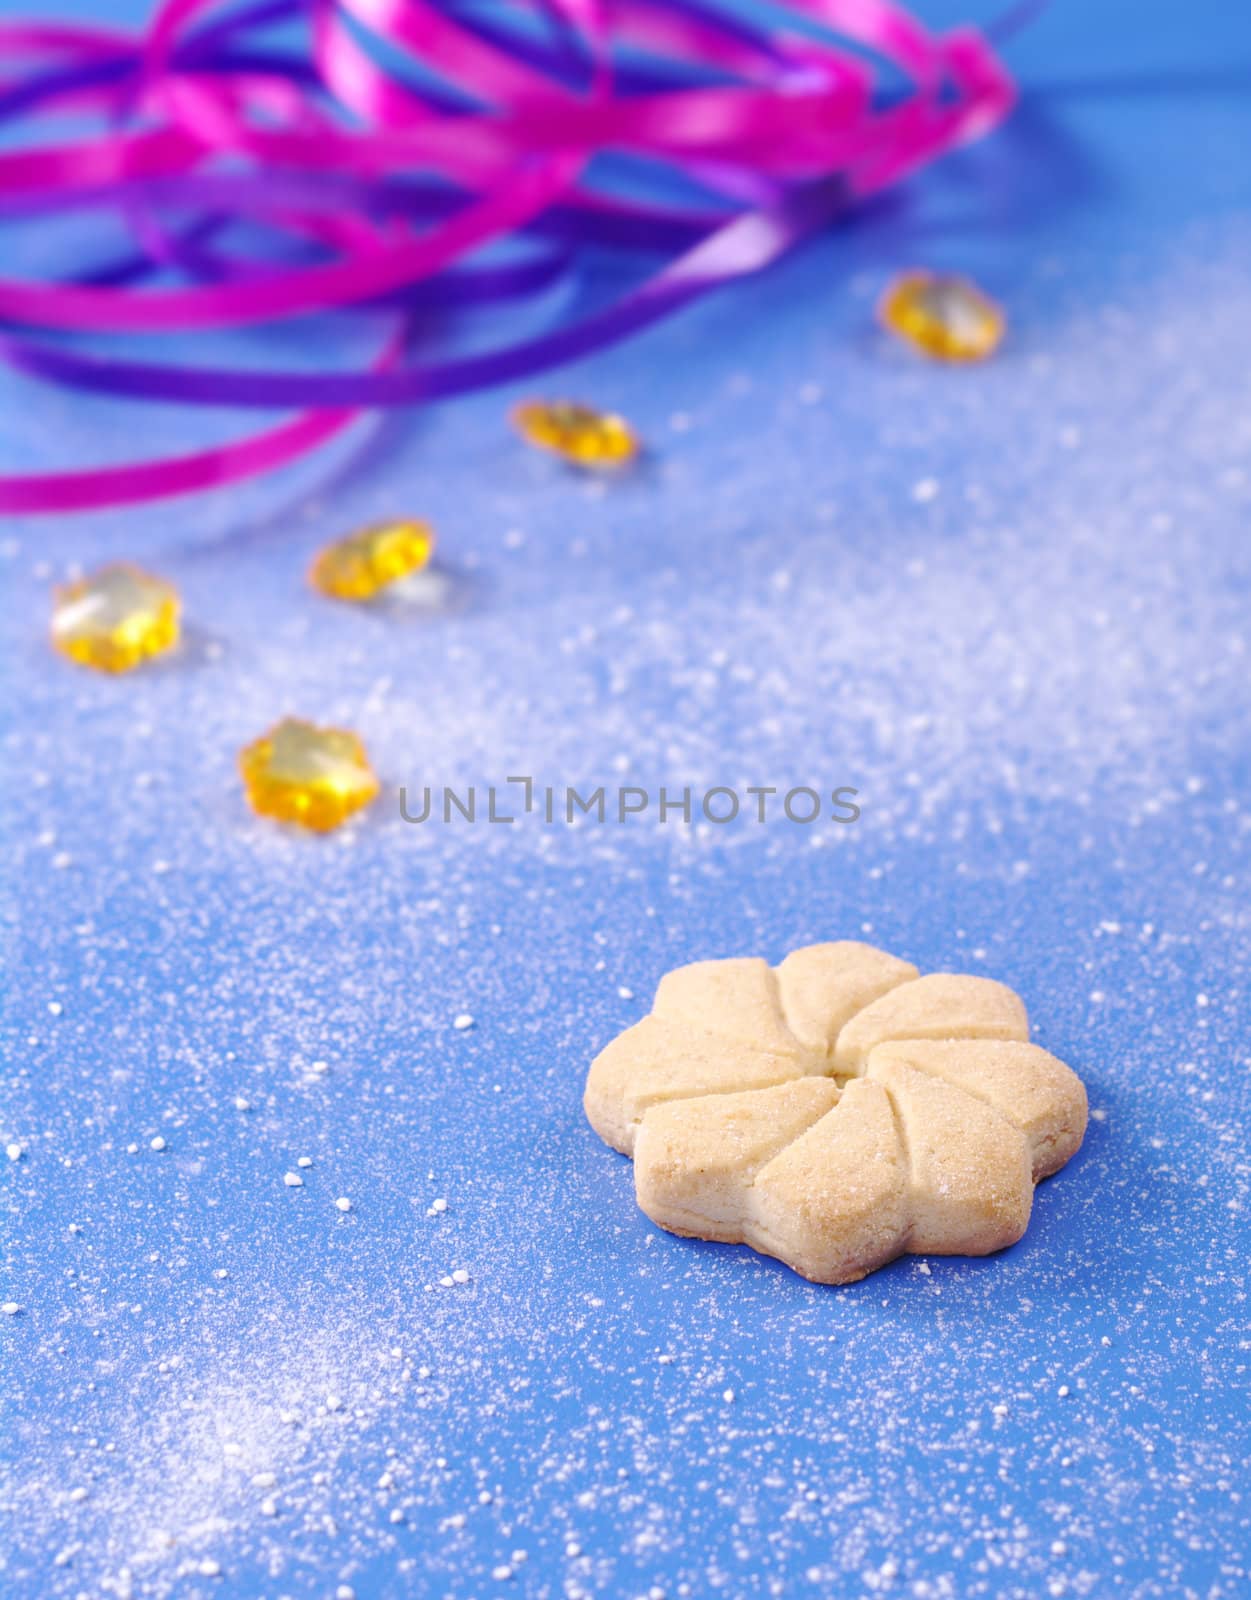 Star-shaped Cookie on Blue  by ildi